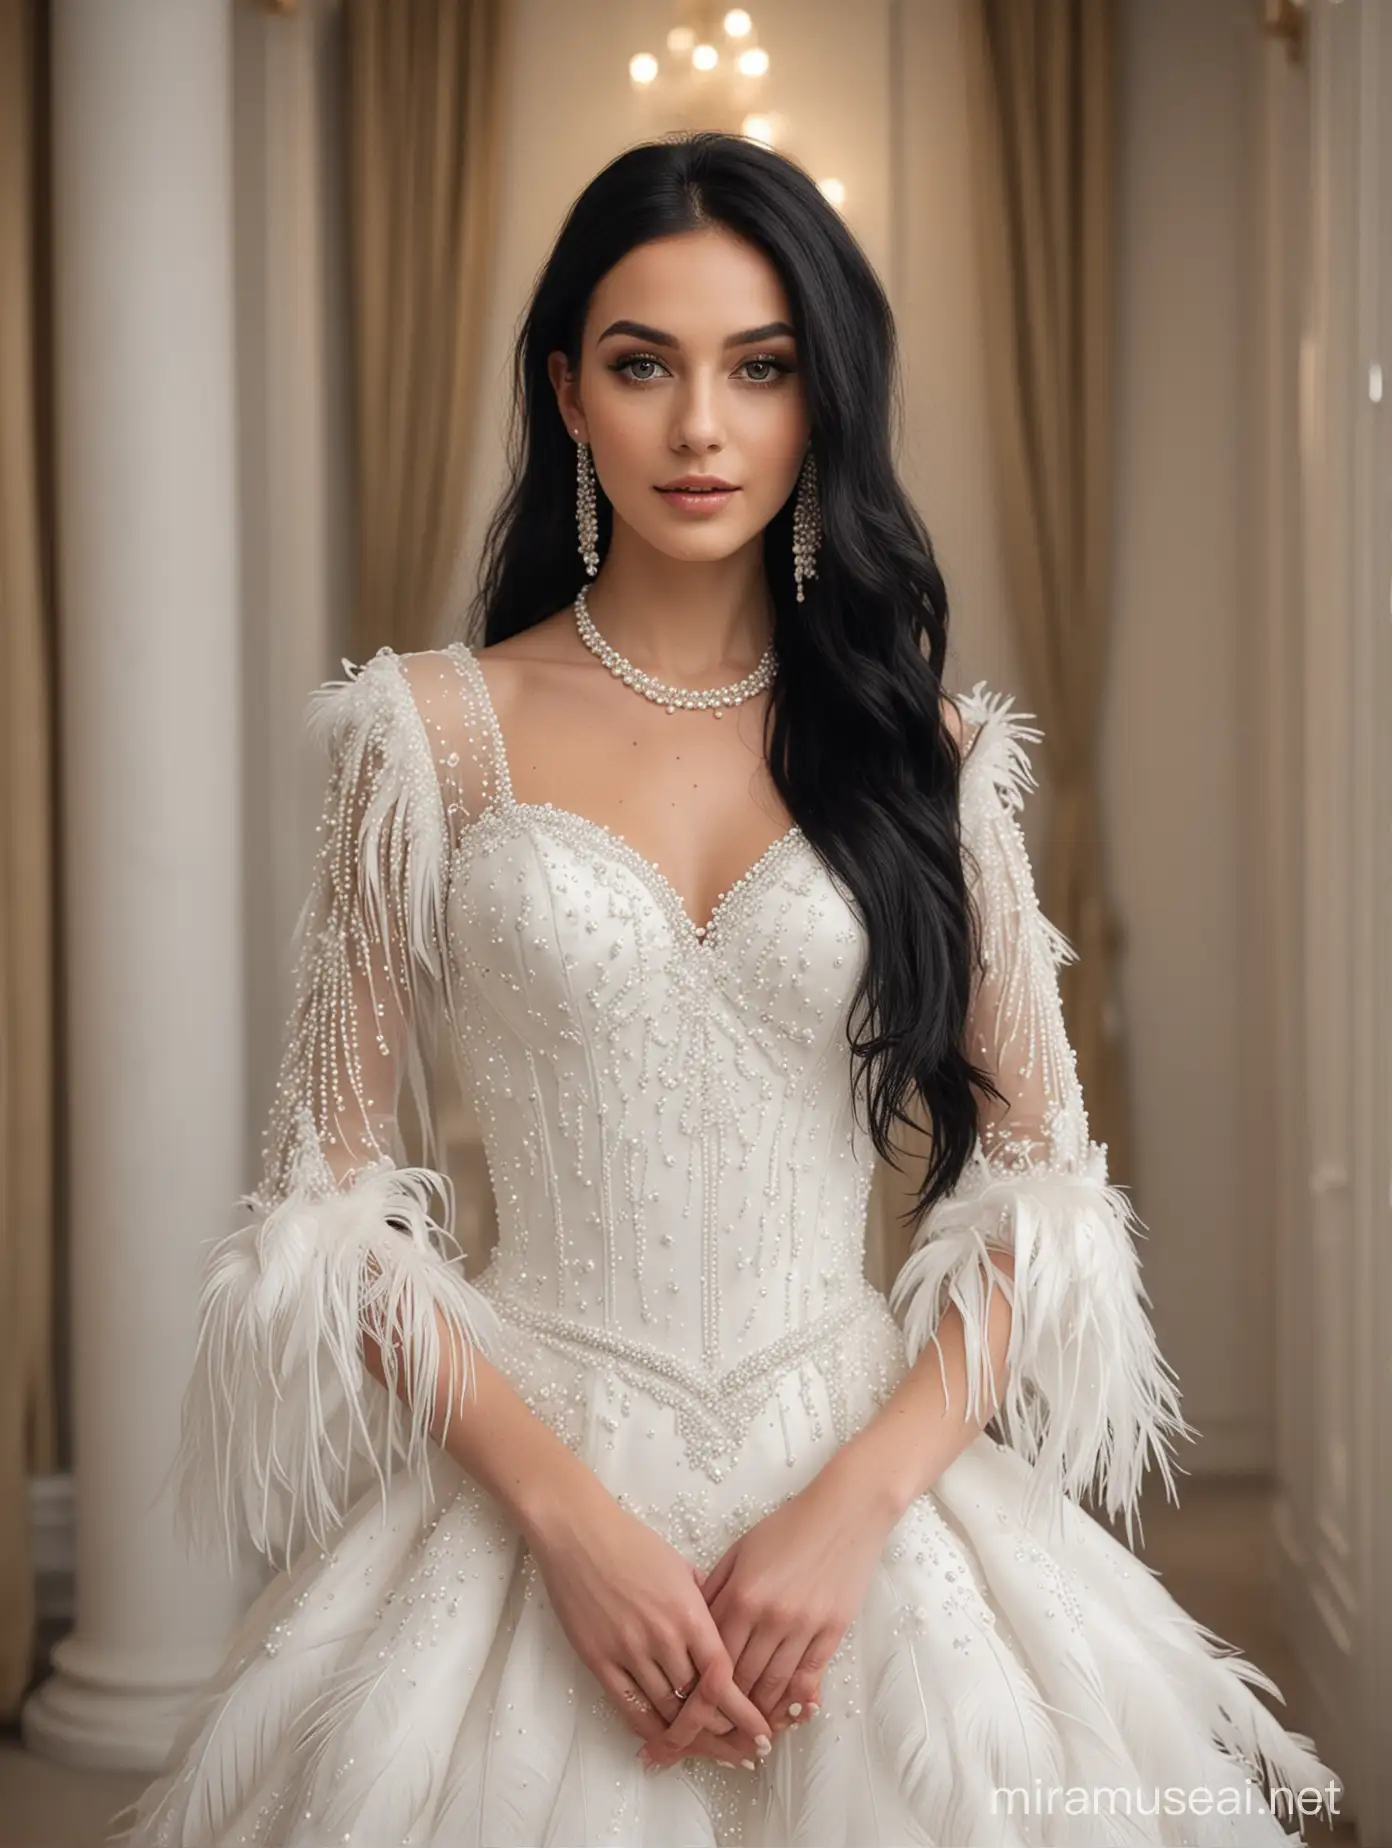 A girl with long black hair and a thin body with a long wedding dress, full of pearls on the sleeves, small feathers on the sleeves and large pearls on the bottom of the wedding dress, long feathers, full of feathers on the chest